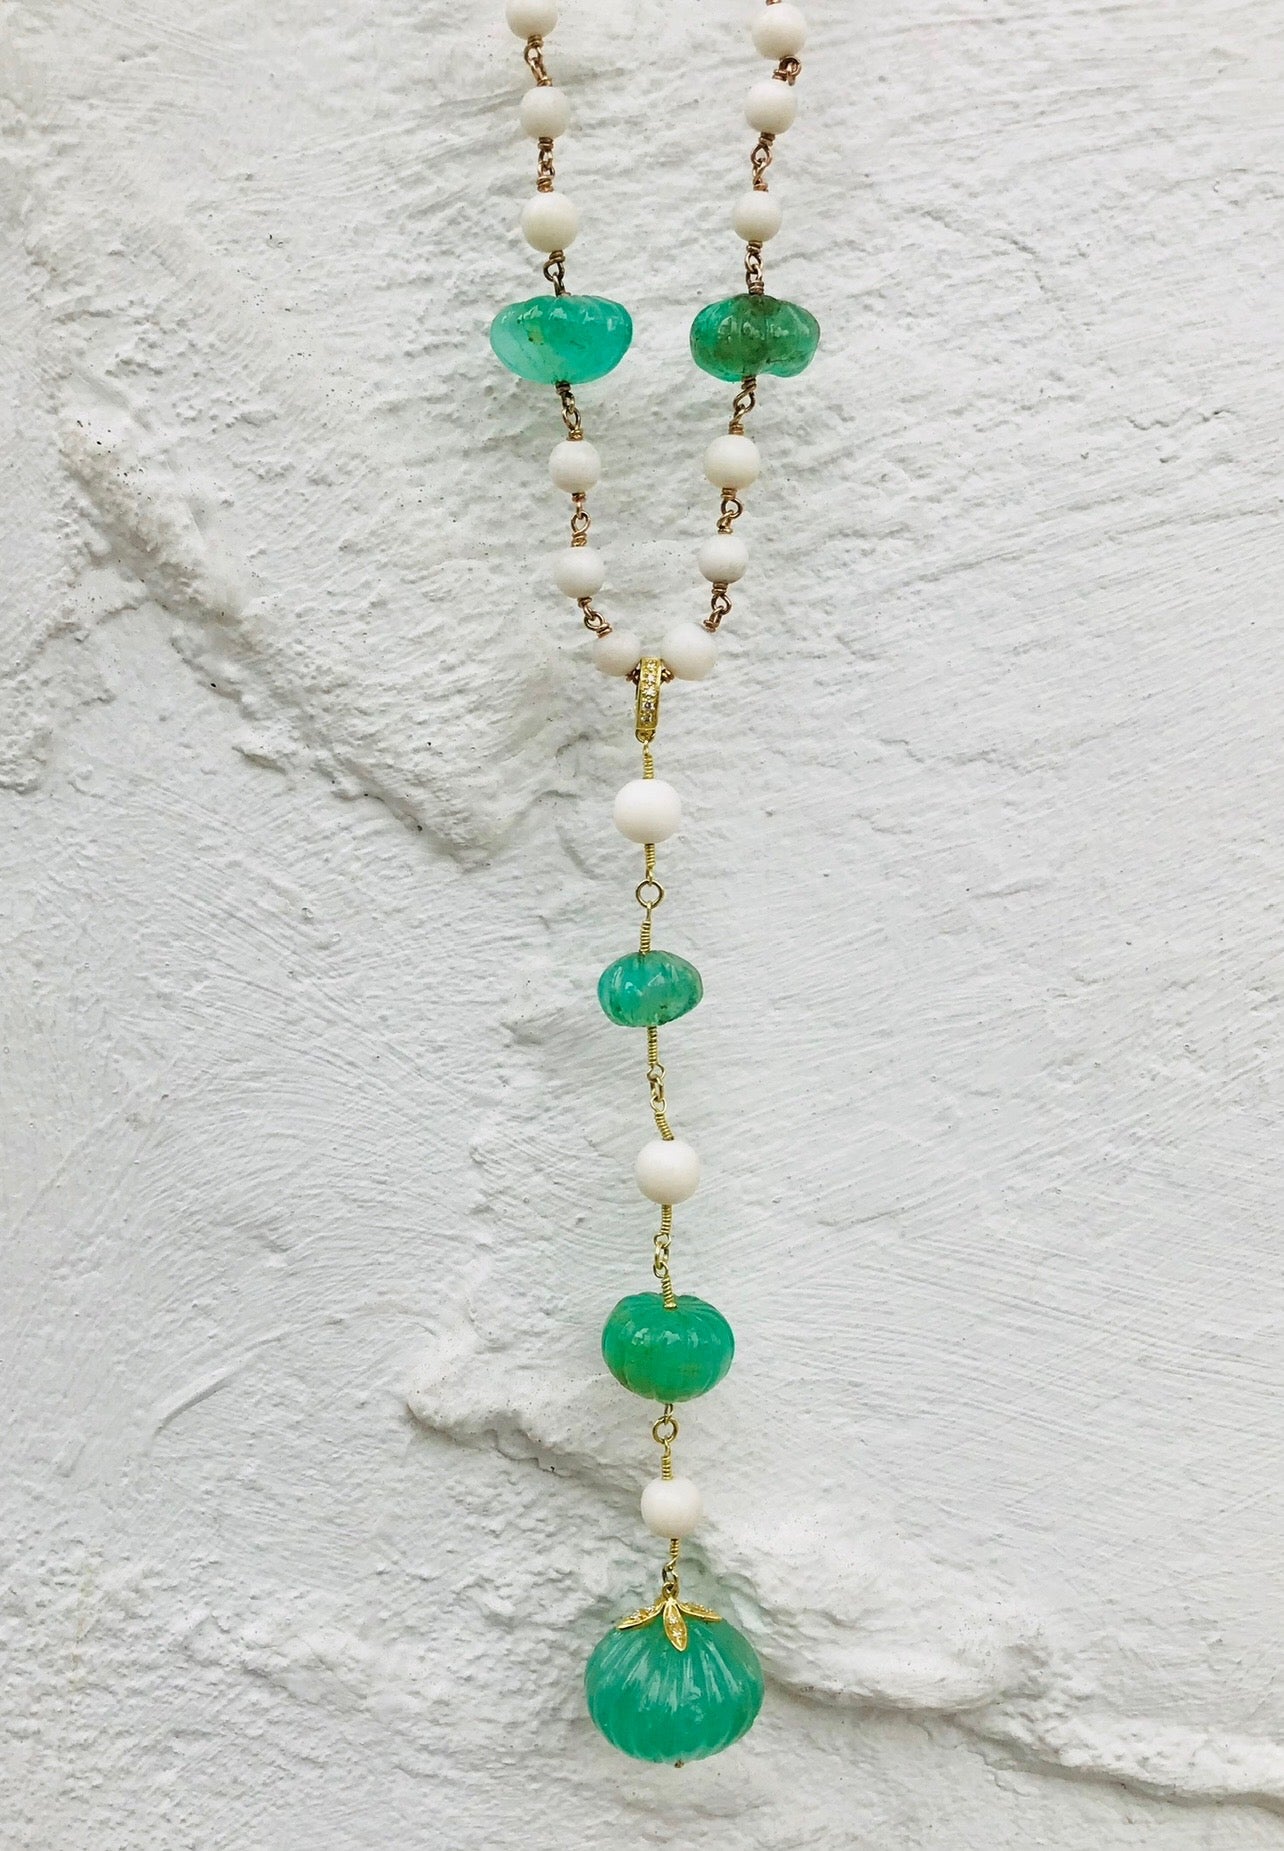 Emerald + Antique Angel Coral Detachable Charm on Handmade Necklace